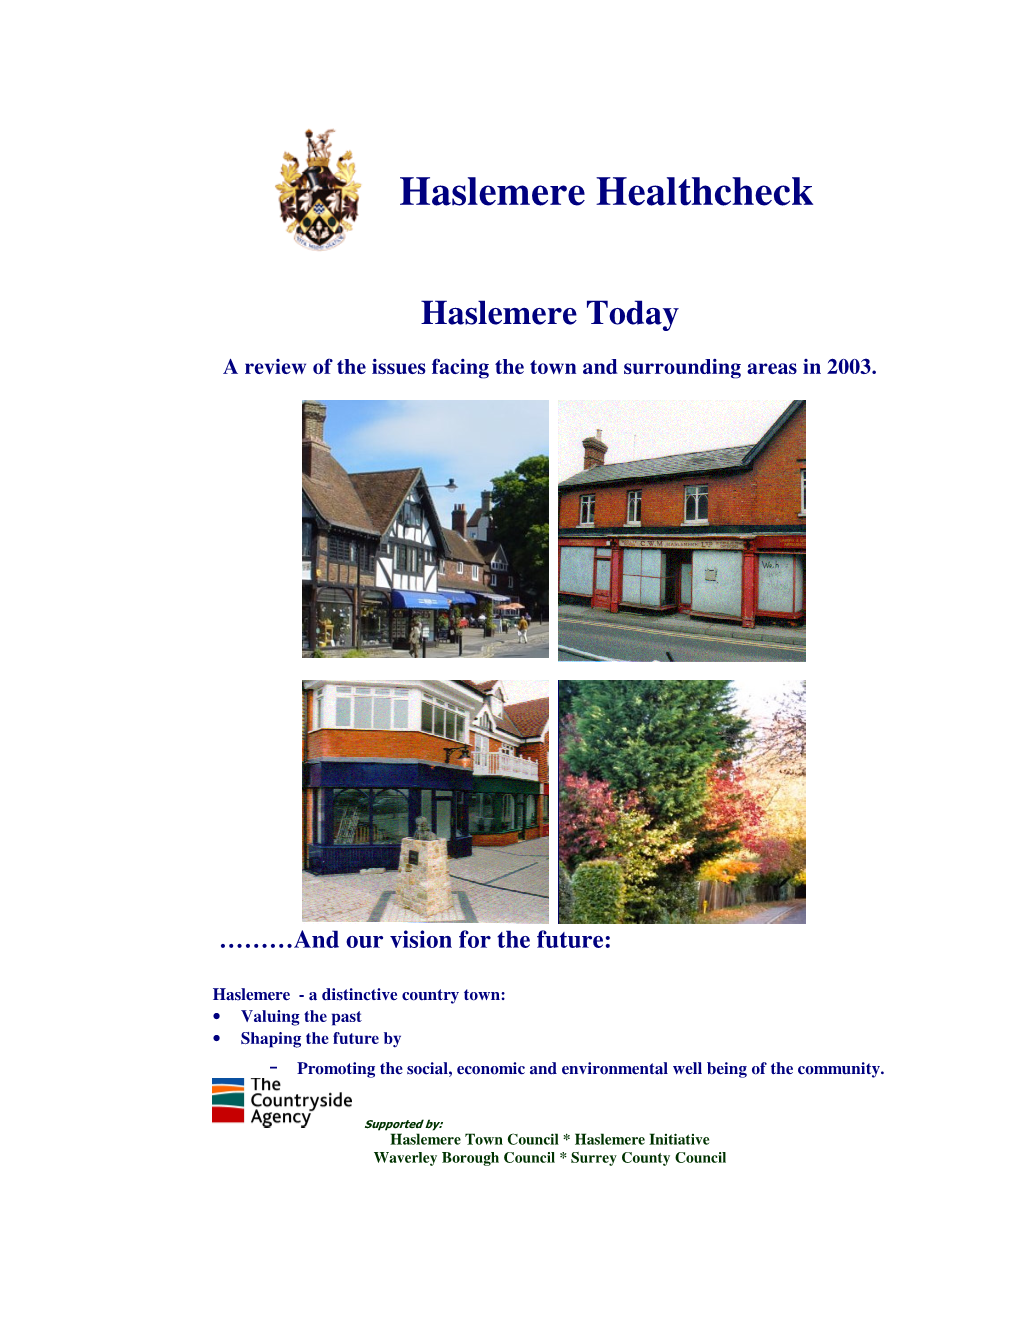 Haslemere Today Jan 04